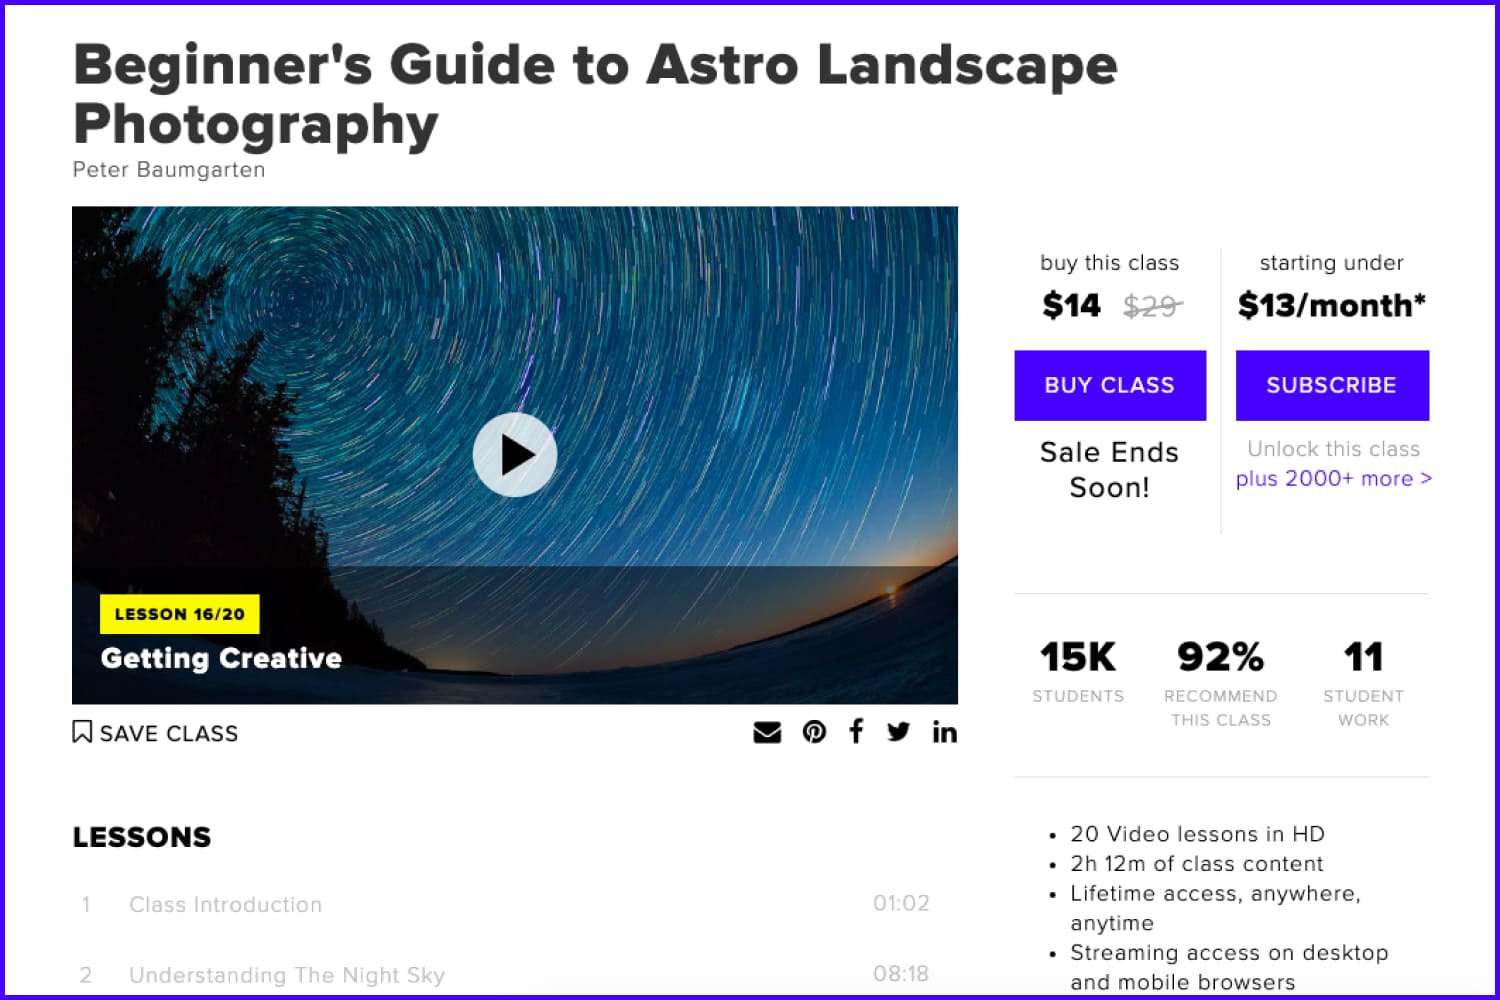 Screenshot of the main page of the Beginner's Guide to Astro Landscape Photography website.